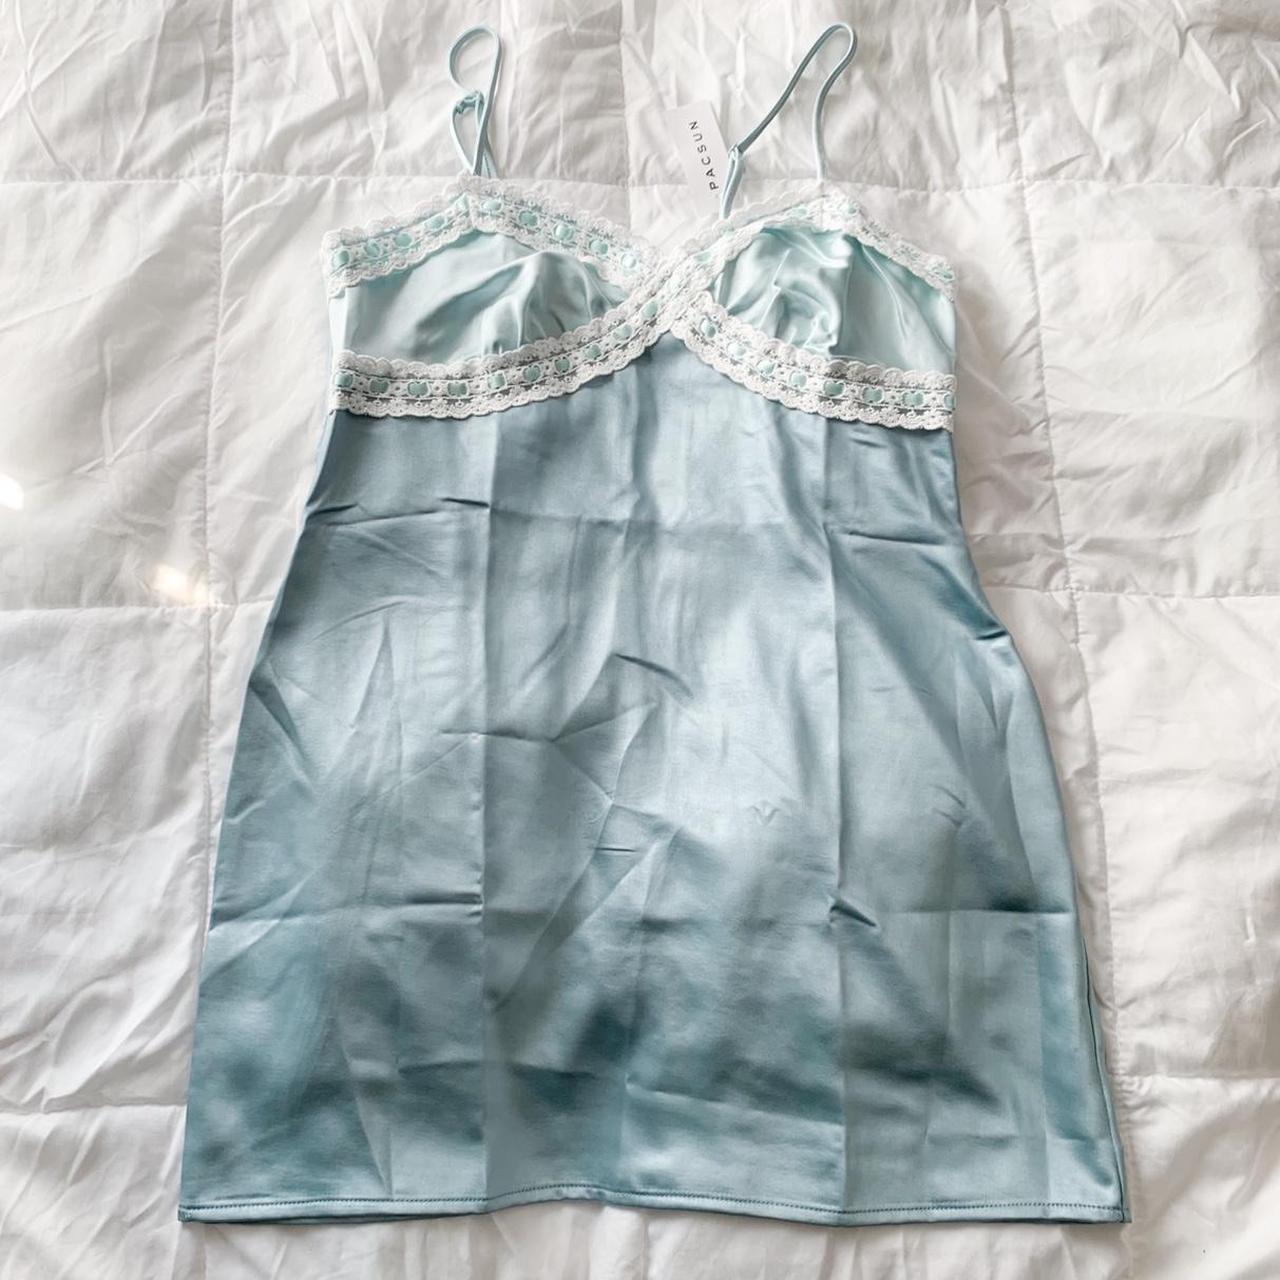 PacSun Women's White and Blue Dress